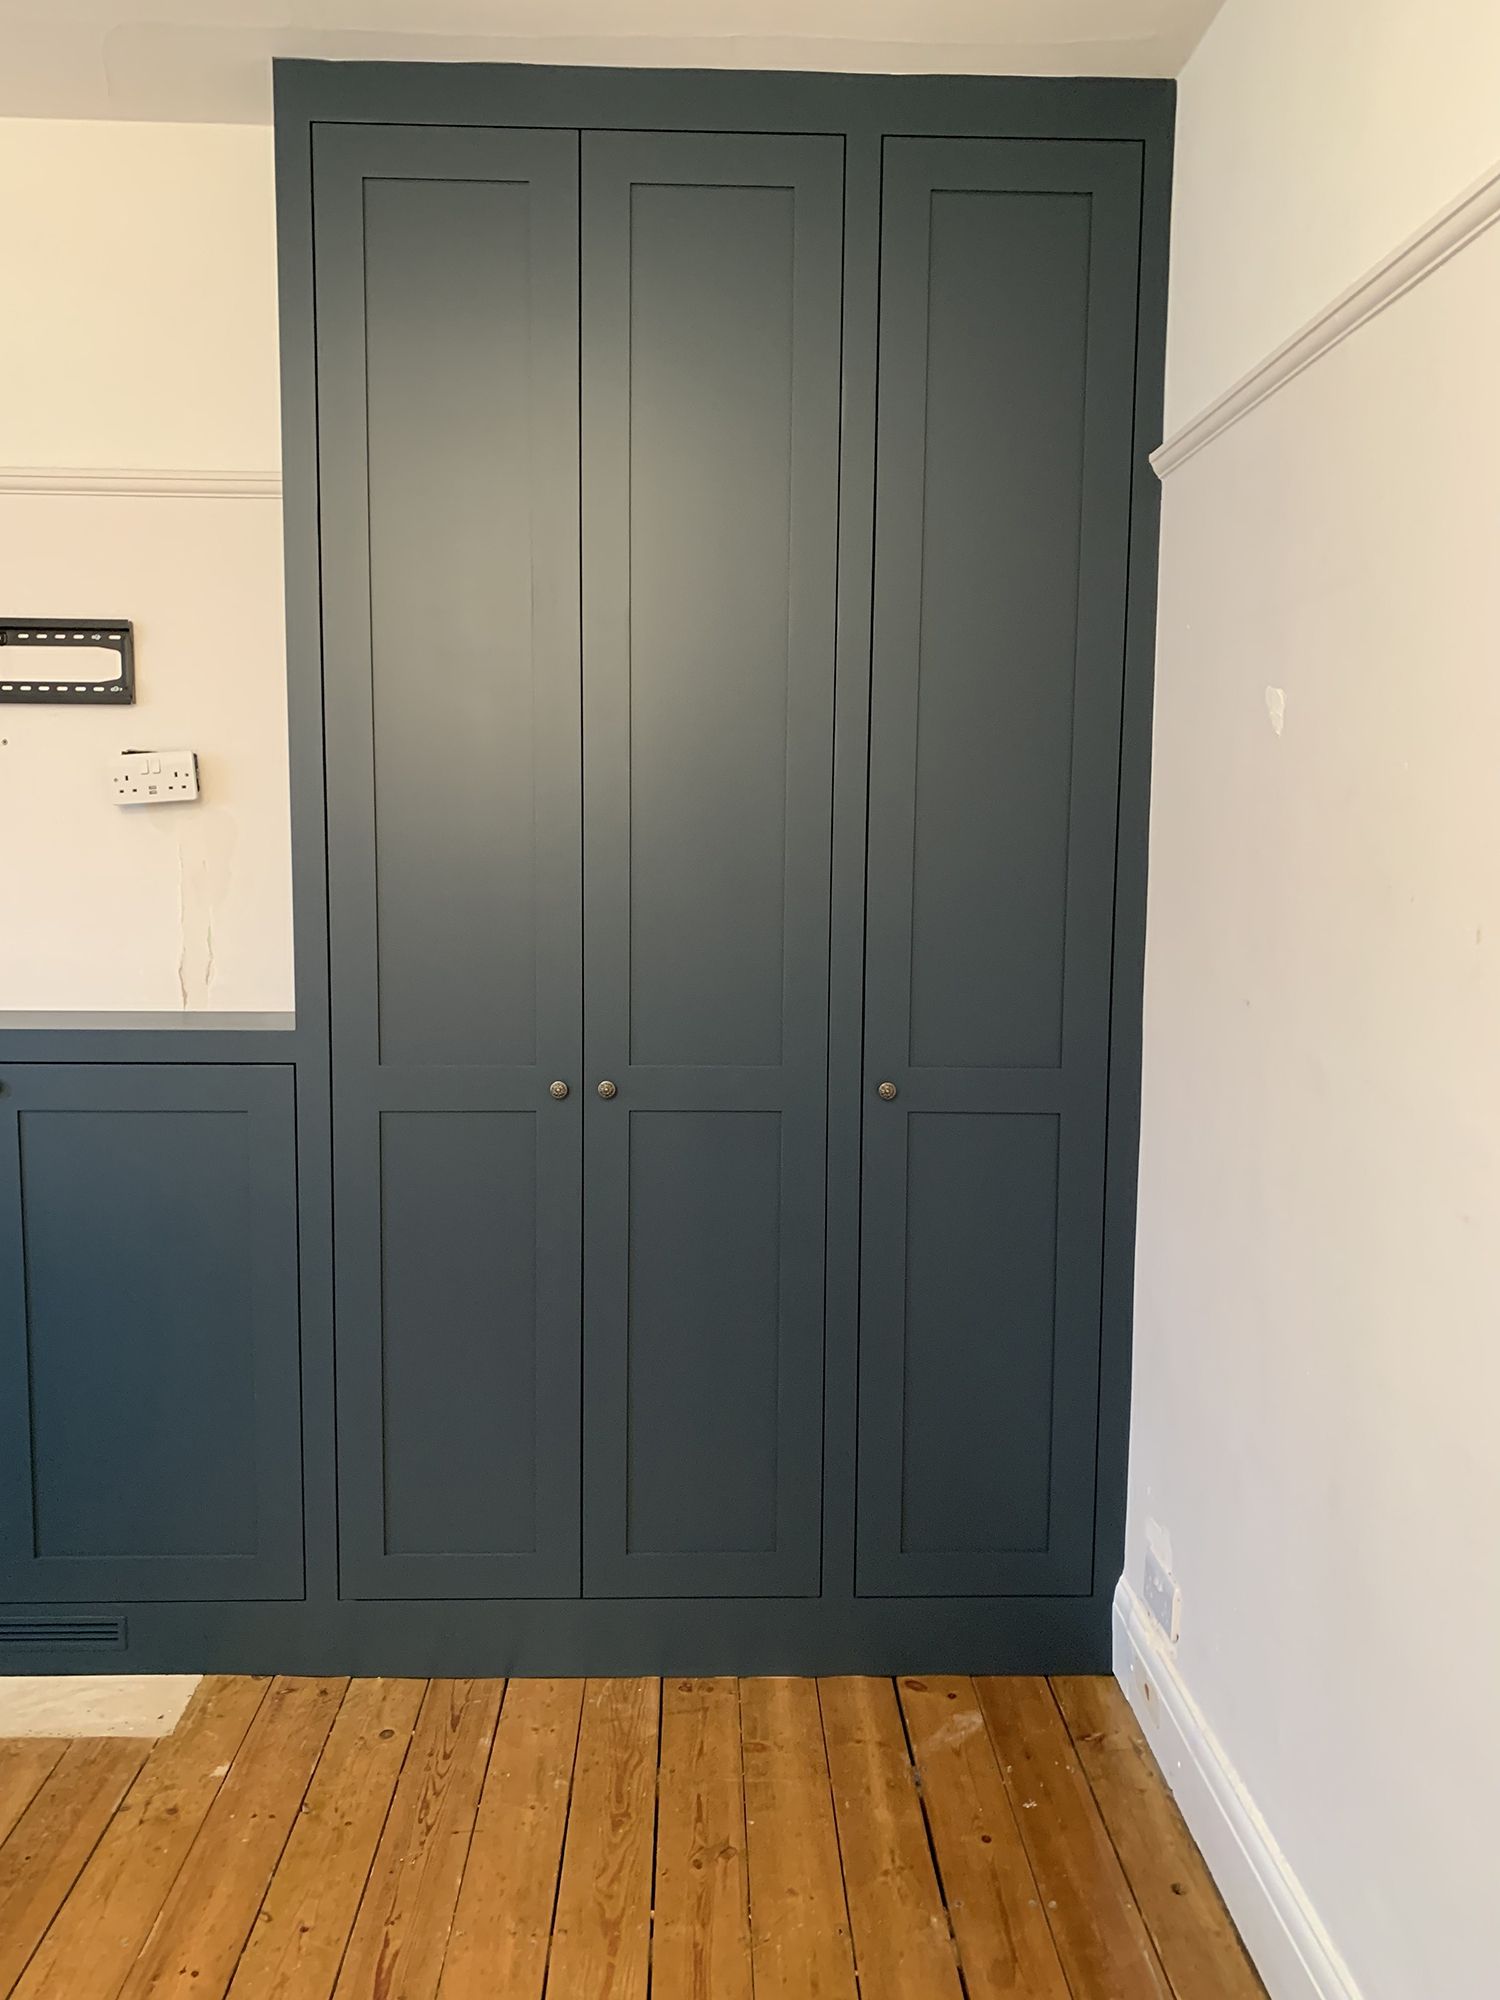 Bespoke Fitted Wardrobes – Jh Carpentry Within Farrow And Ball Painted Wardrobes (View 17 of 20)